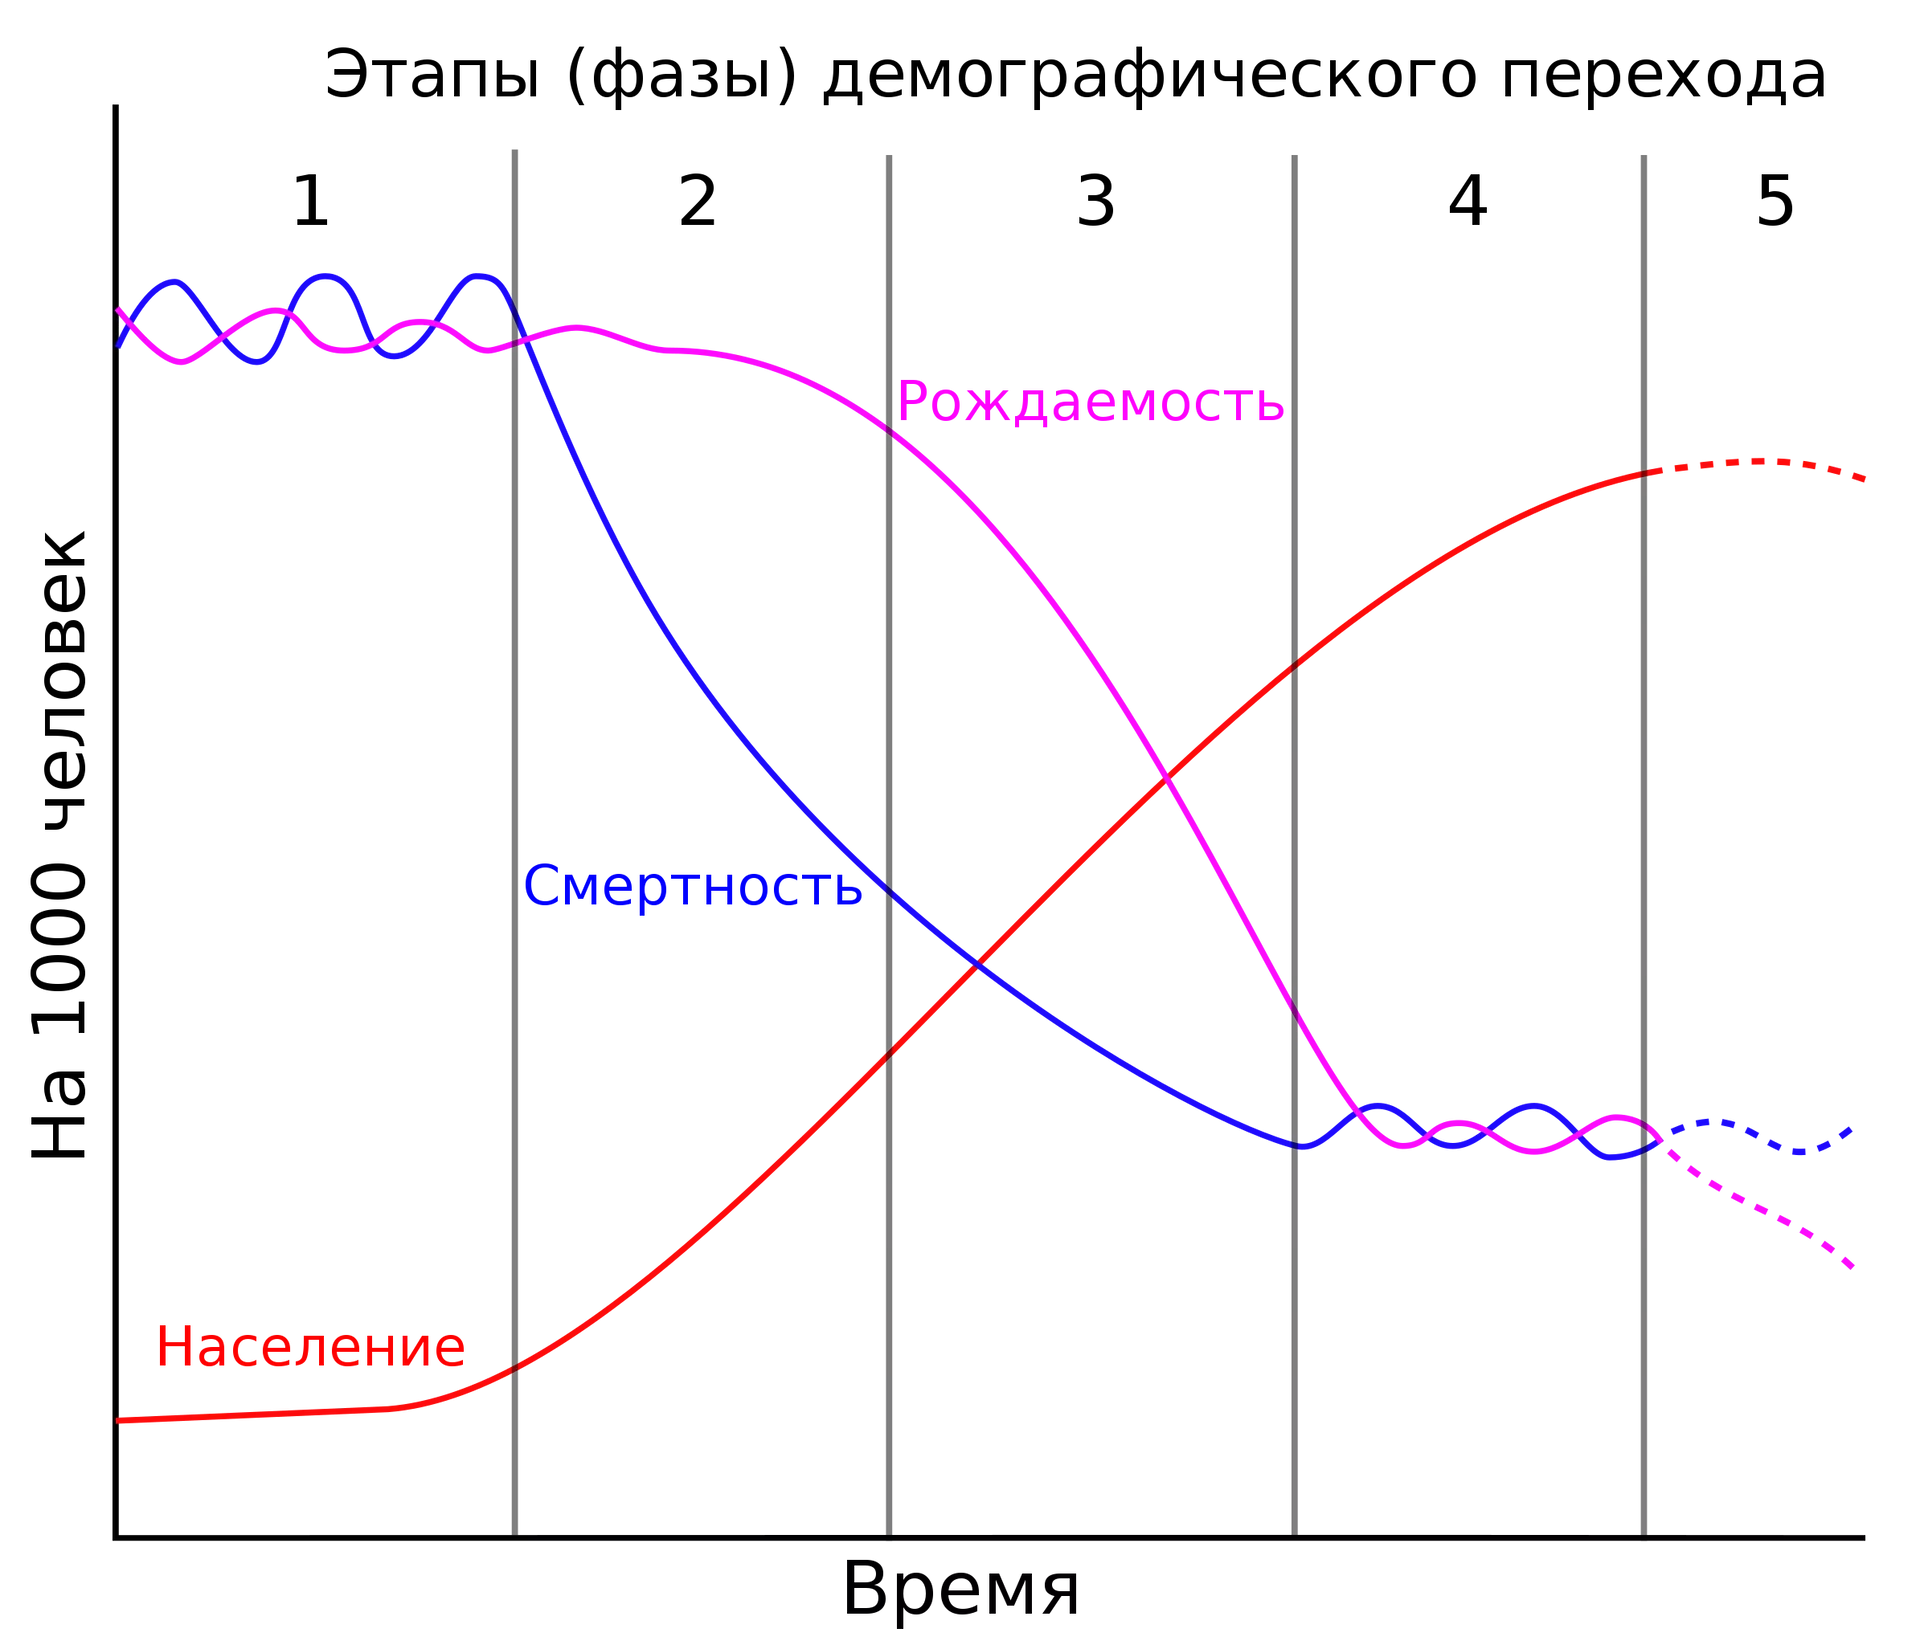 CC BY-SA 3.0 / en:User:Charmed88 / The Demographic Transition Model, including stage 5